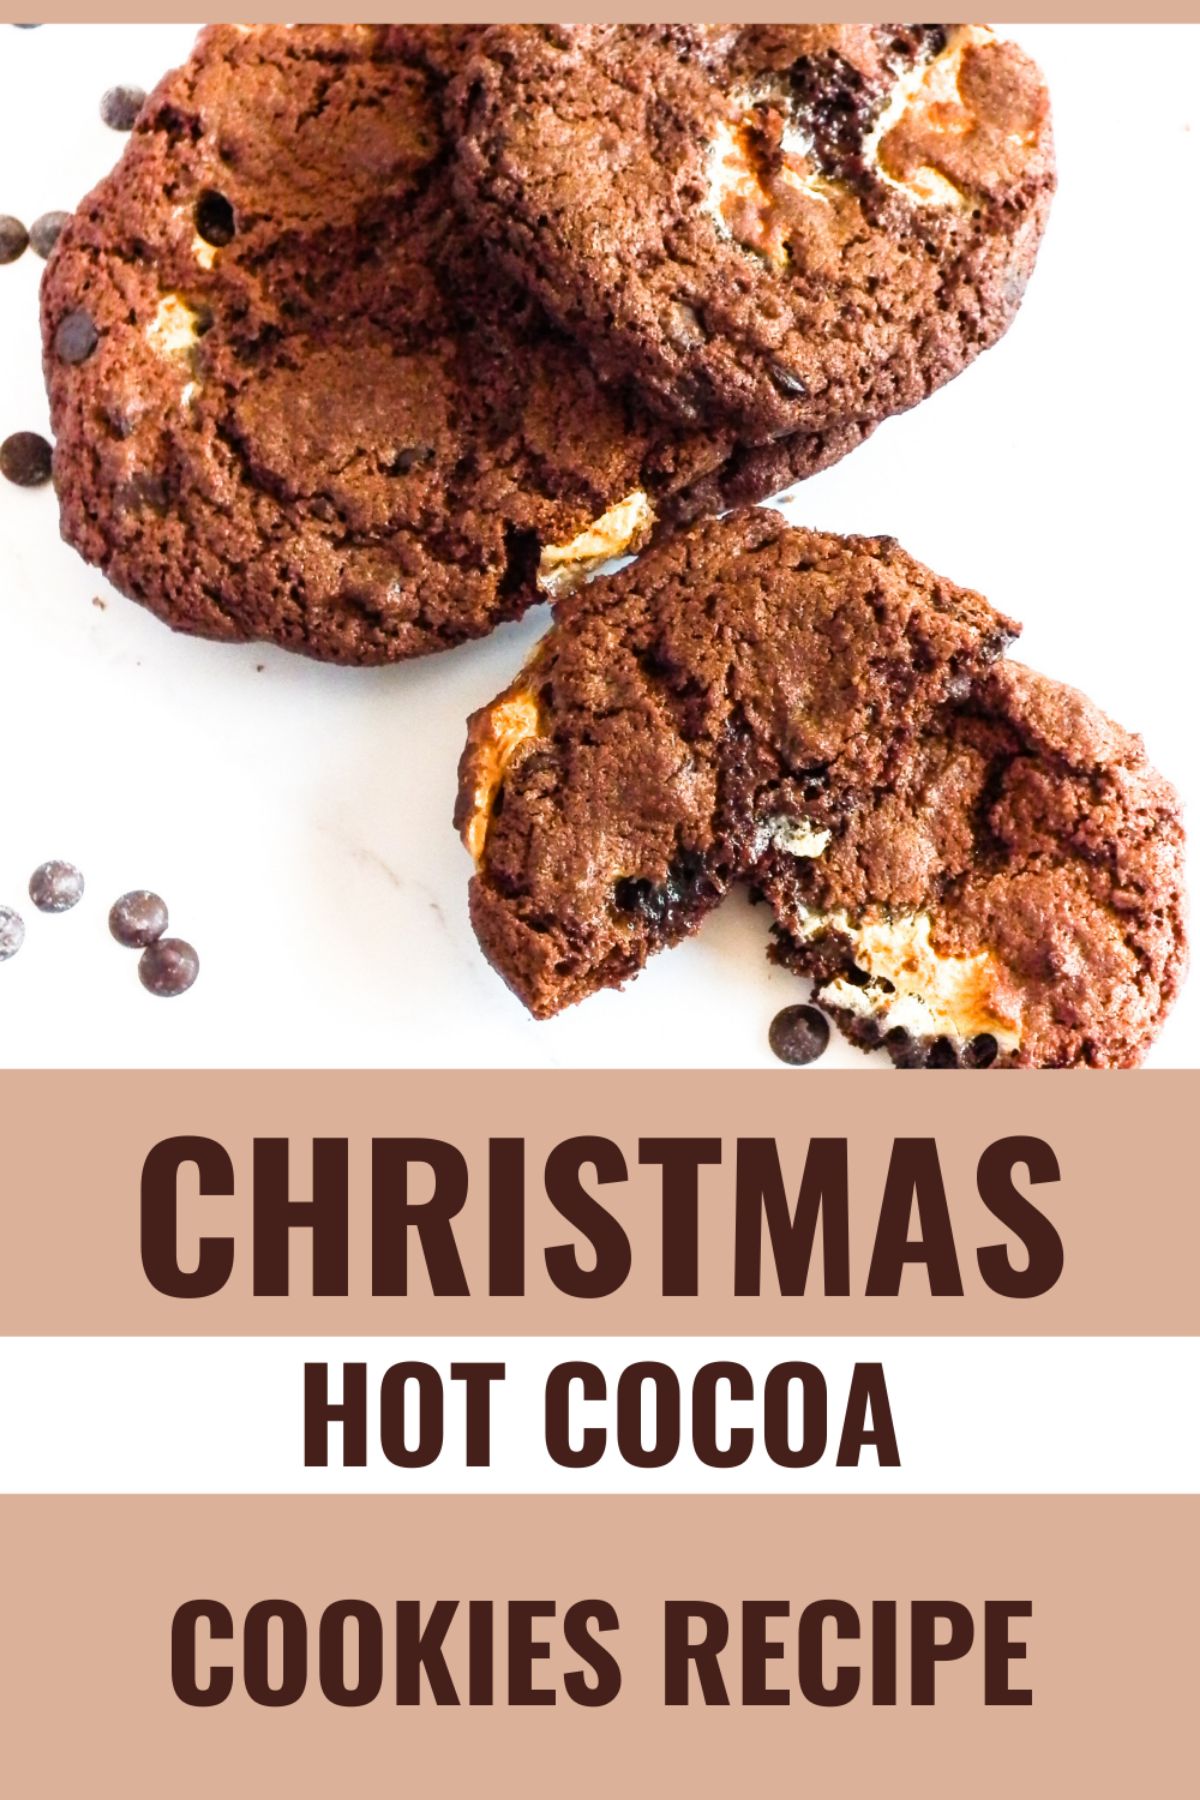 Christmas Hot Cocoa Cookies are the perfect mix of chewy and rich chocolate cookies. They're the perfect wintertime treat. #christmascookie #hotcocoa #christmas #cookie #chocolate via @wondermomwannab